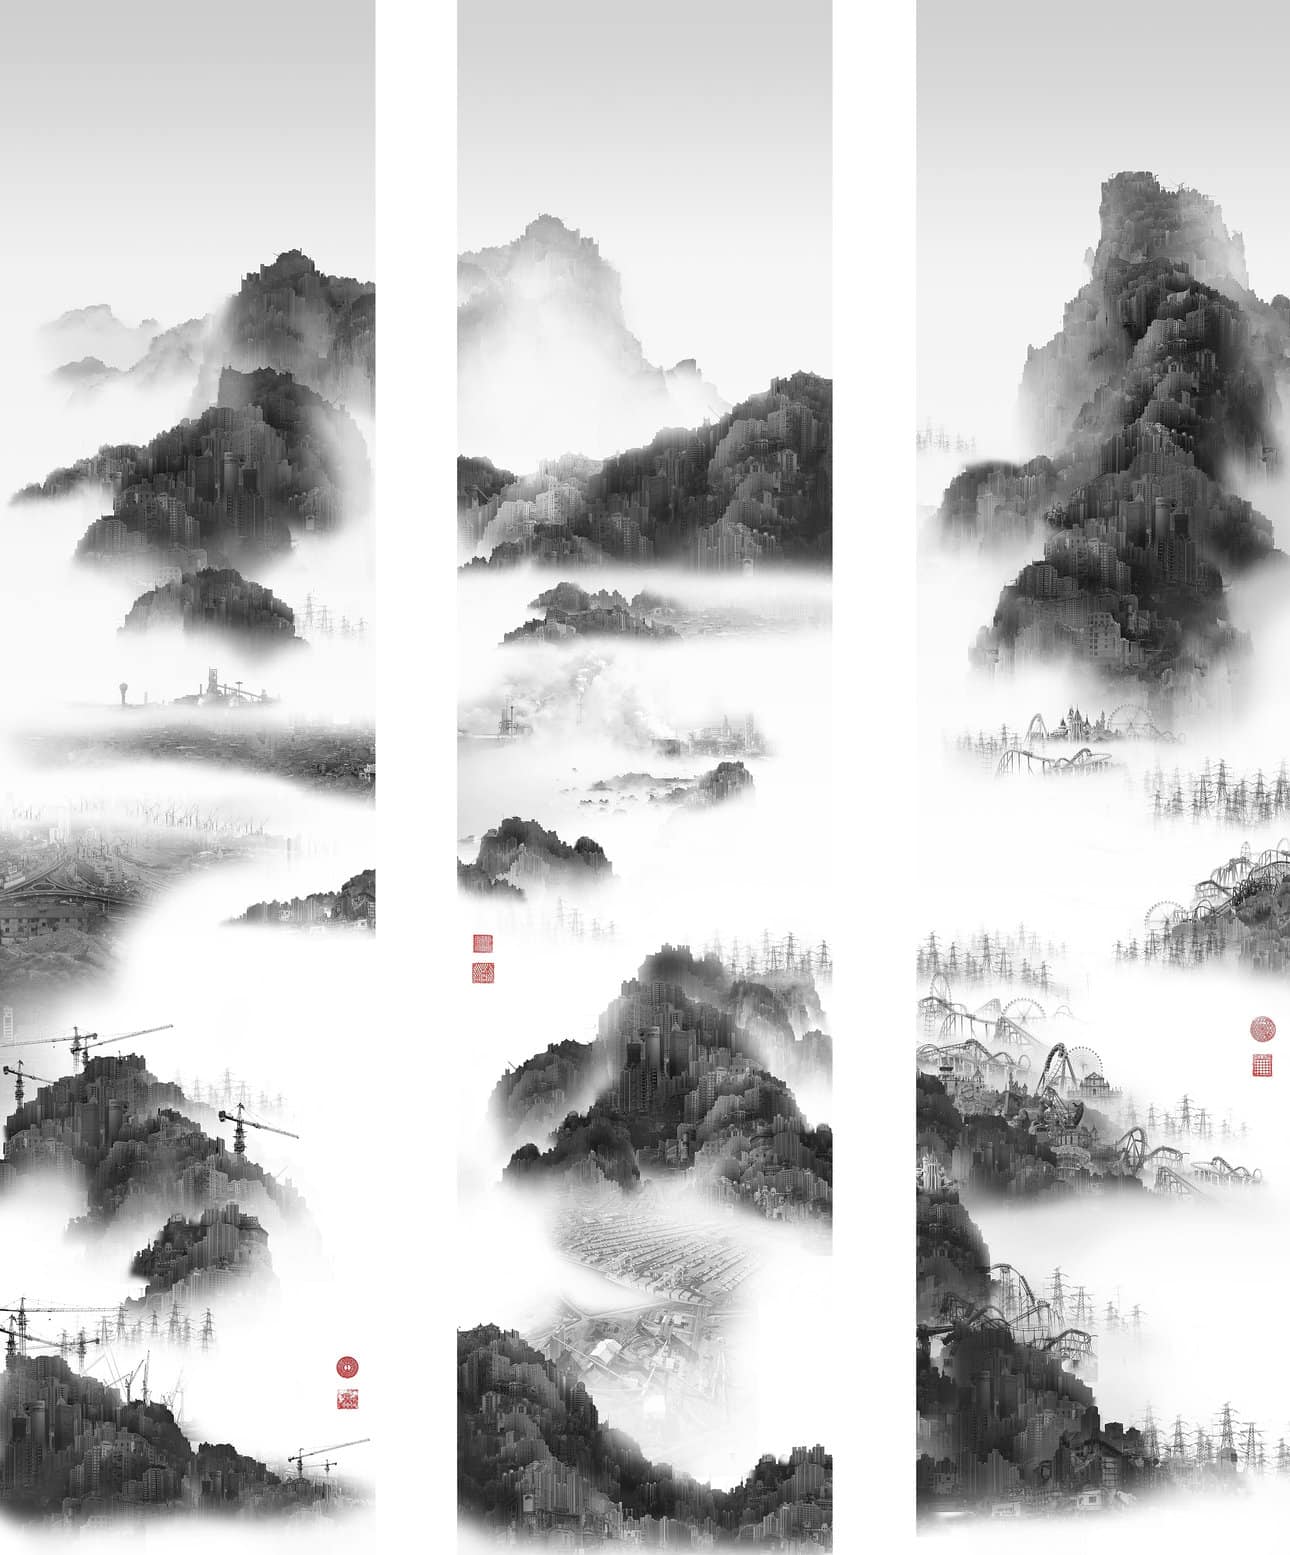  This artwork is a contemporary triptych by Yang Yongliang titled "Phantom Landscape III." Created in China in 2007, it is part of the collection at Wereldmuseum. The piece merges traditional Chinese landscape painting techniques with modern elements, creating an intriguing blend of the past and present.